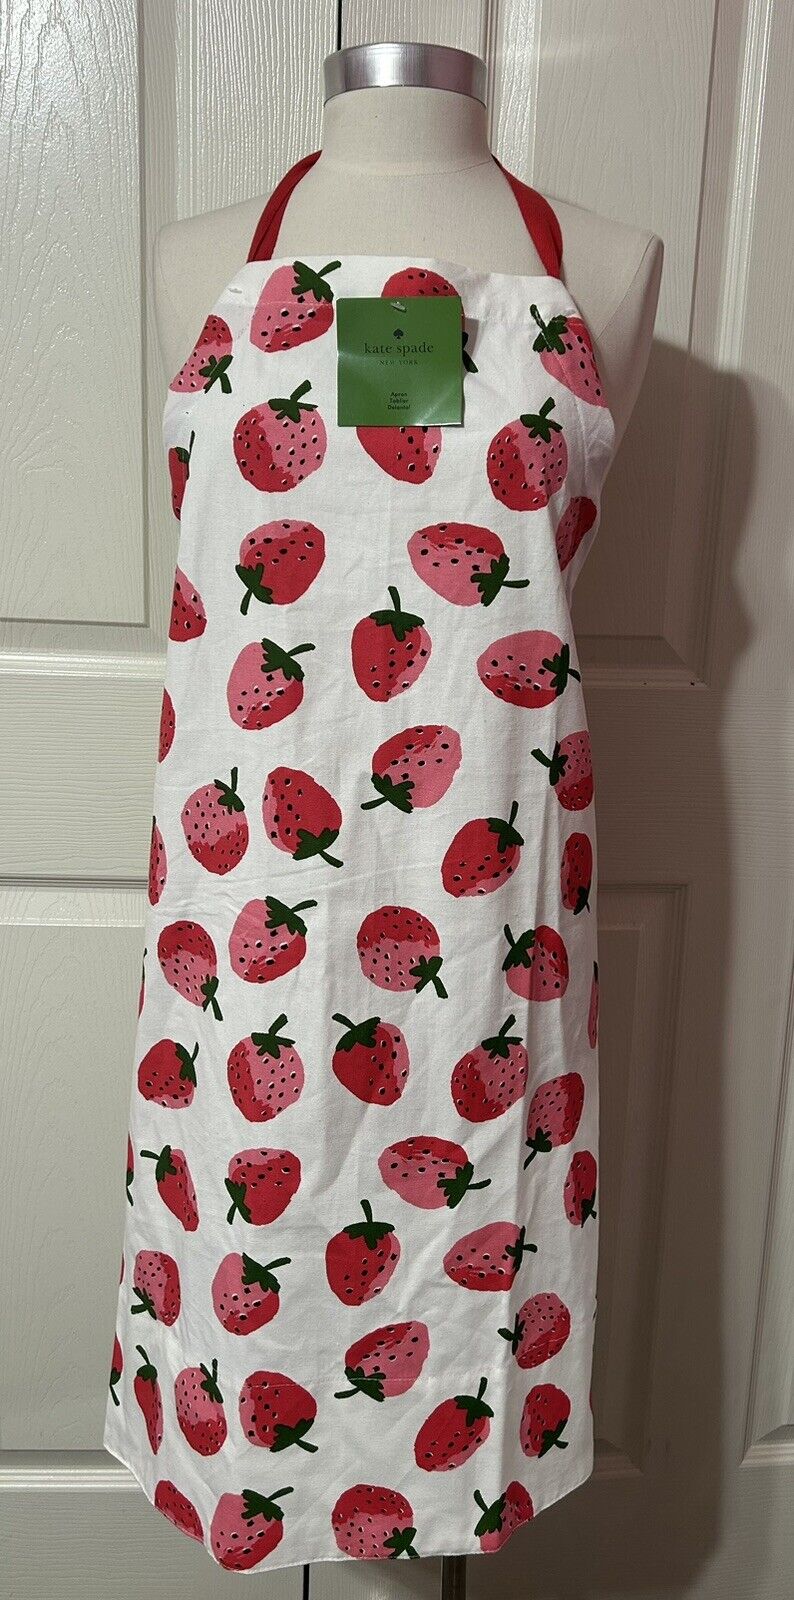 Kate Spade New York Diner Apron - For Good Measure - Strawberry Print - 33\